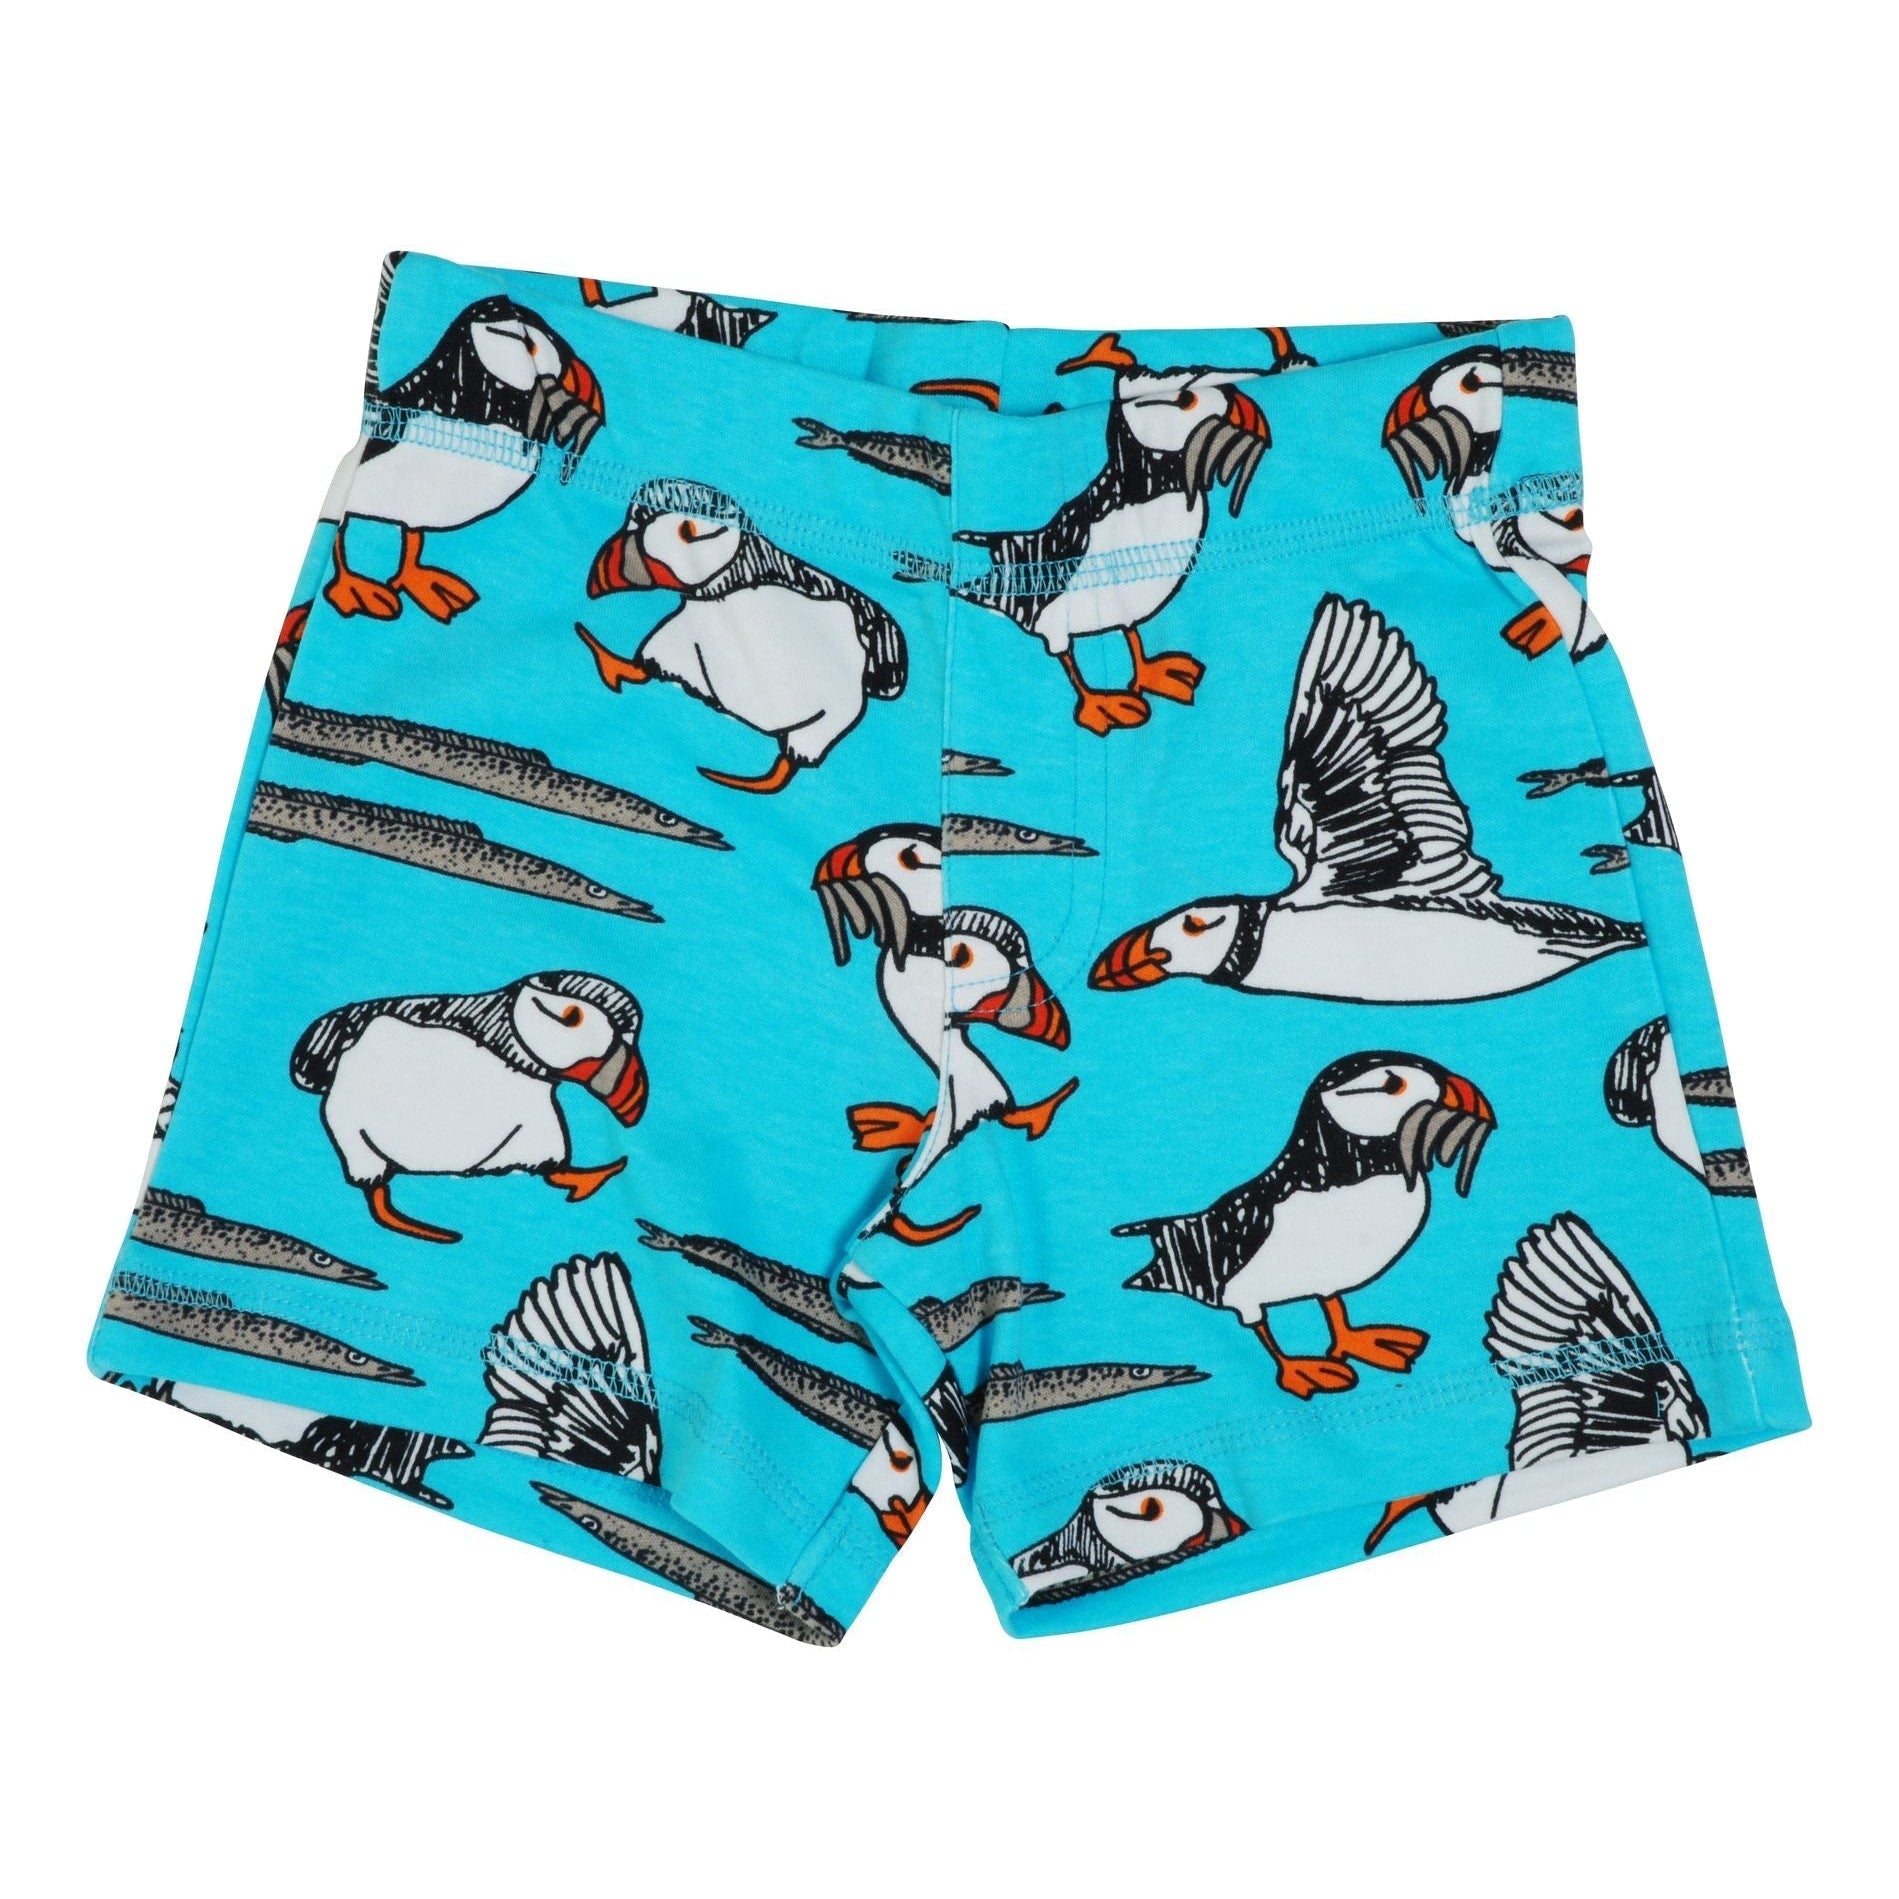 Puffins - Blue Atoll Shorts - 2 Left Size 10-12 & 12-14 years-Duns Sweden-Modern Rascals